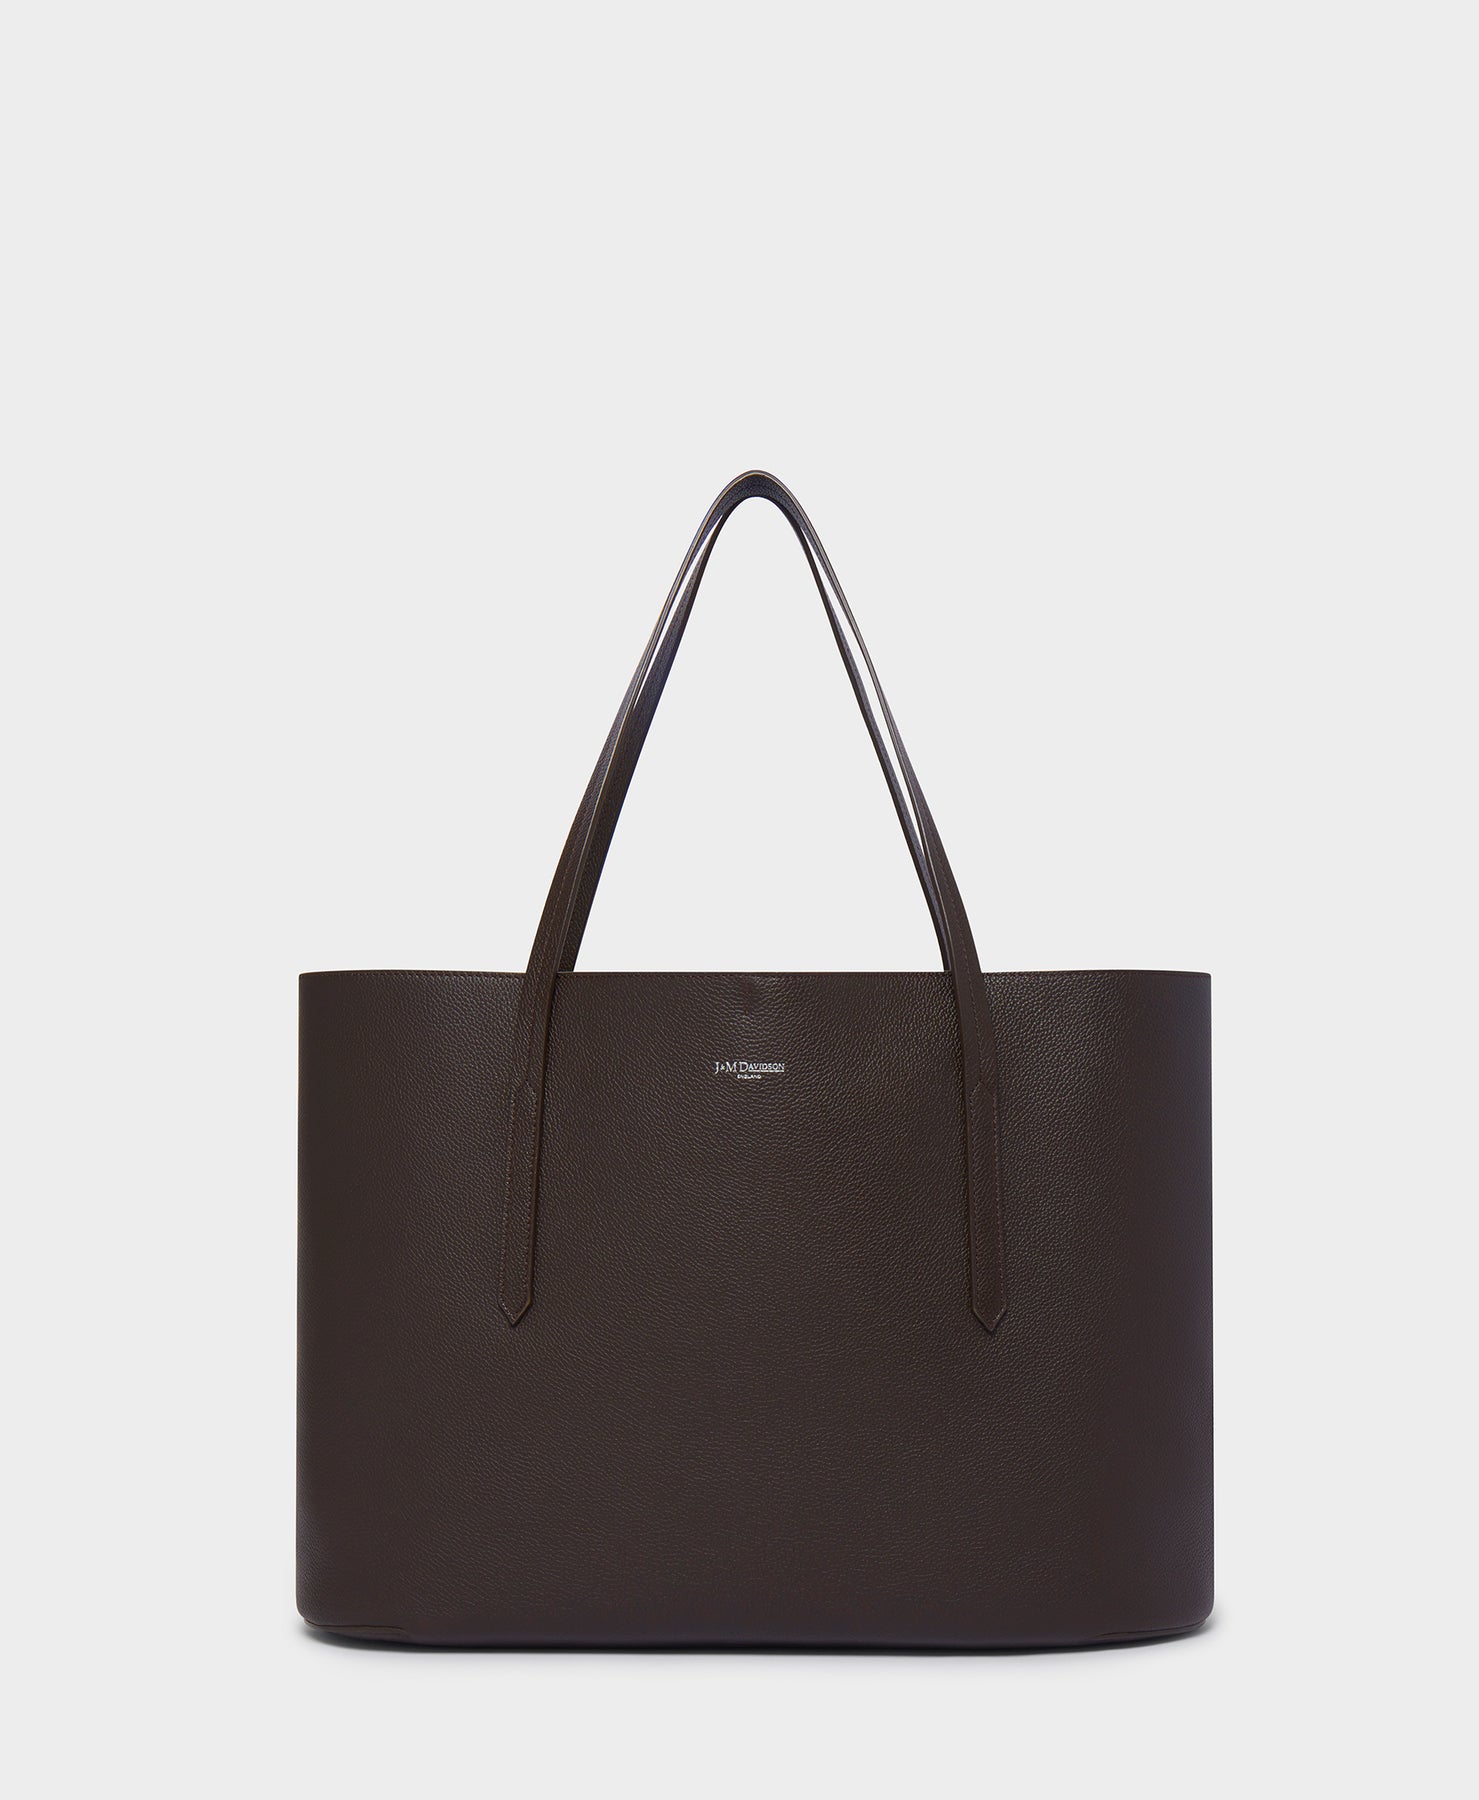 East West large leather tote